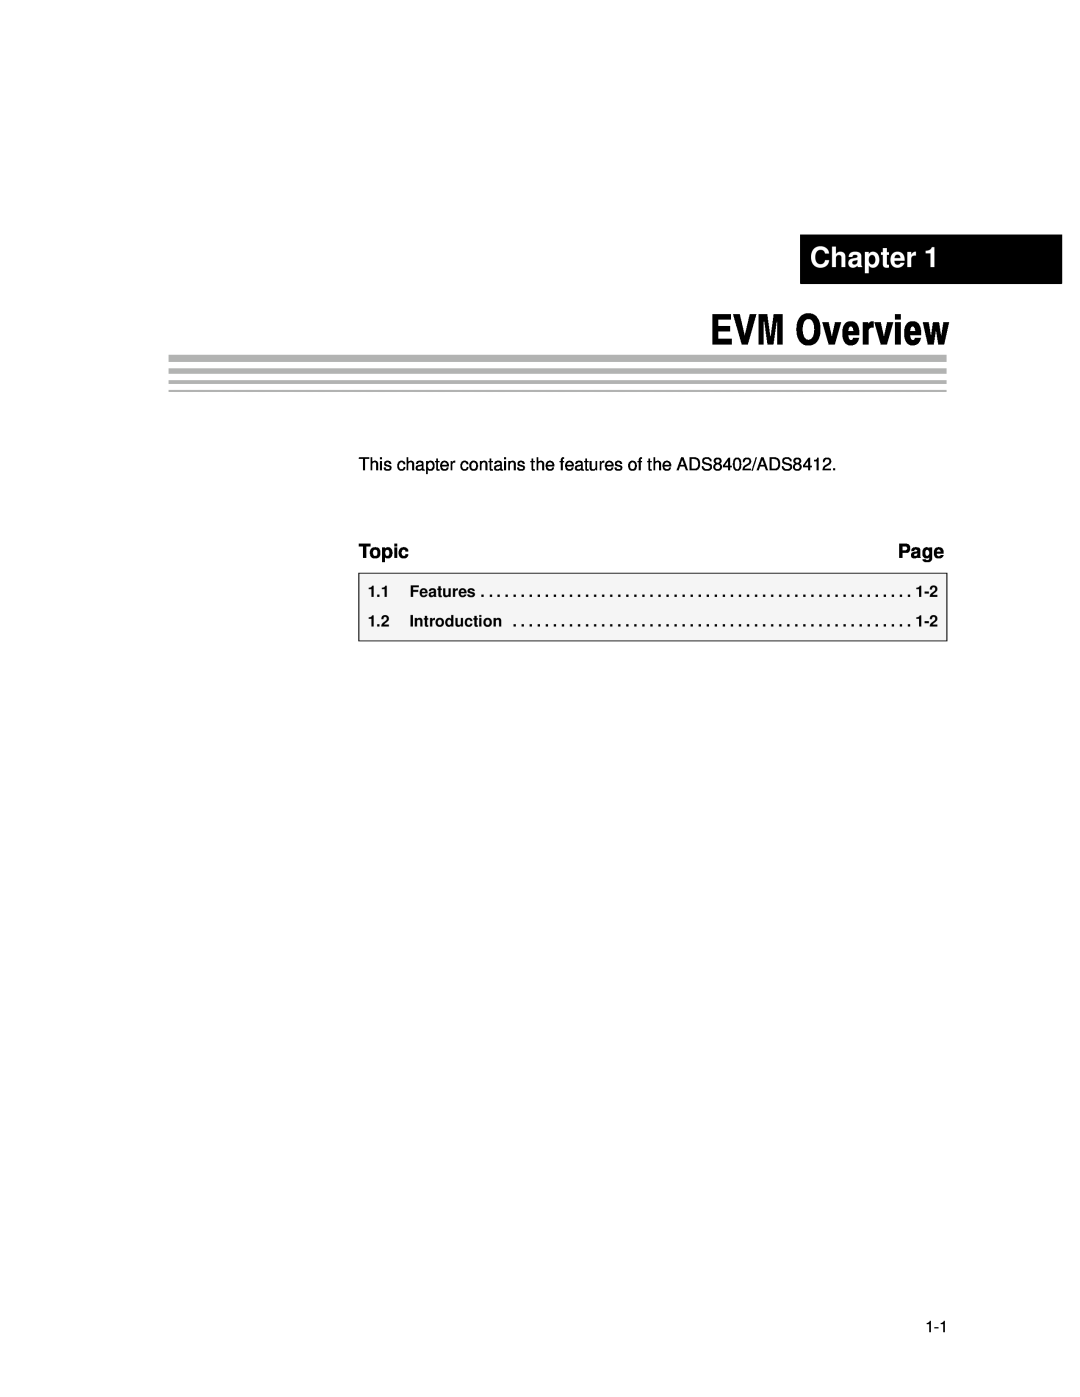 Texas Instruments ADS8402 EVM, ADS8412 EVM manual EVM Overview, Chapter, Page, Topic 